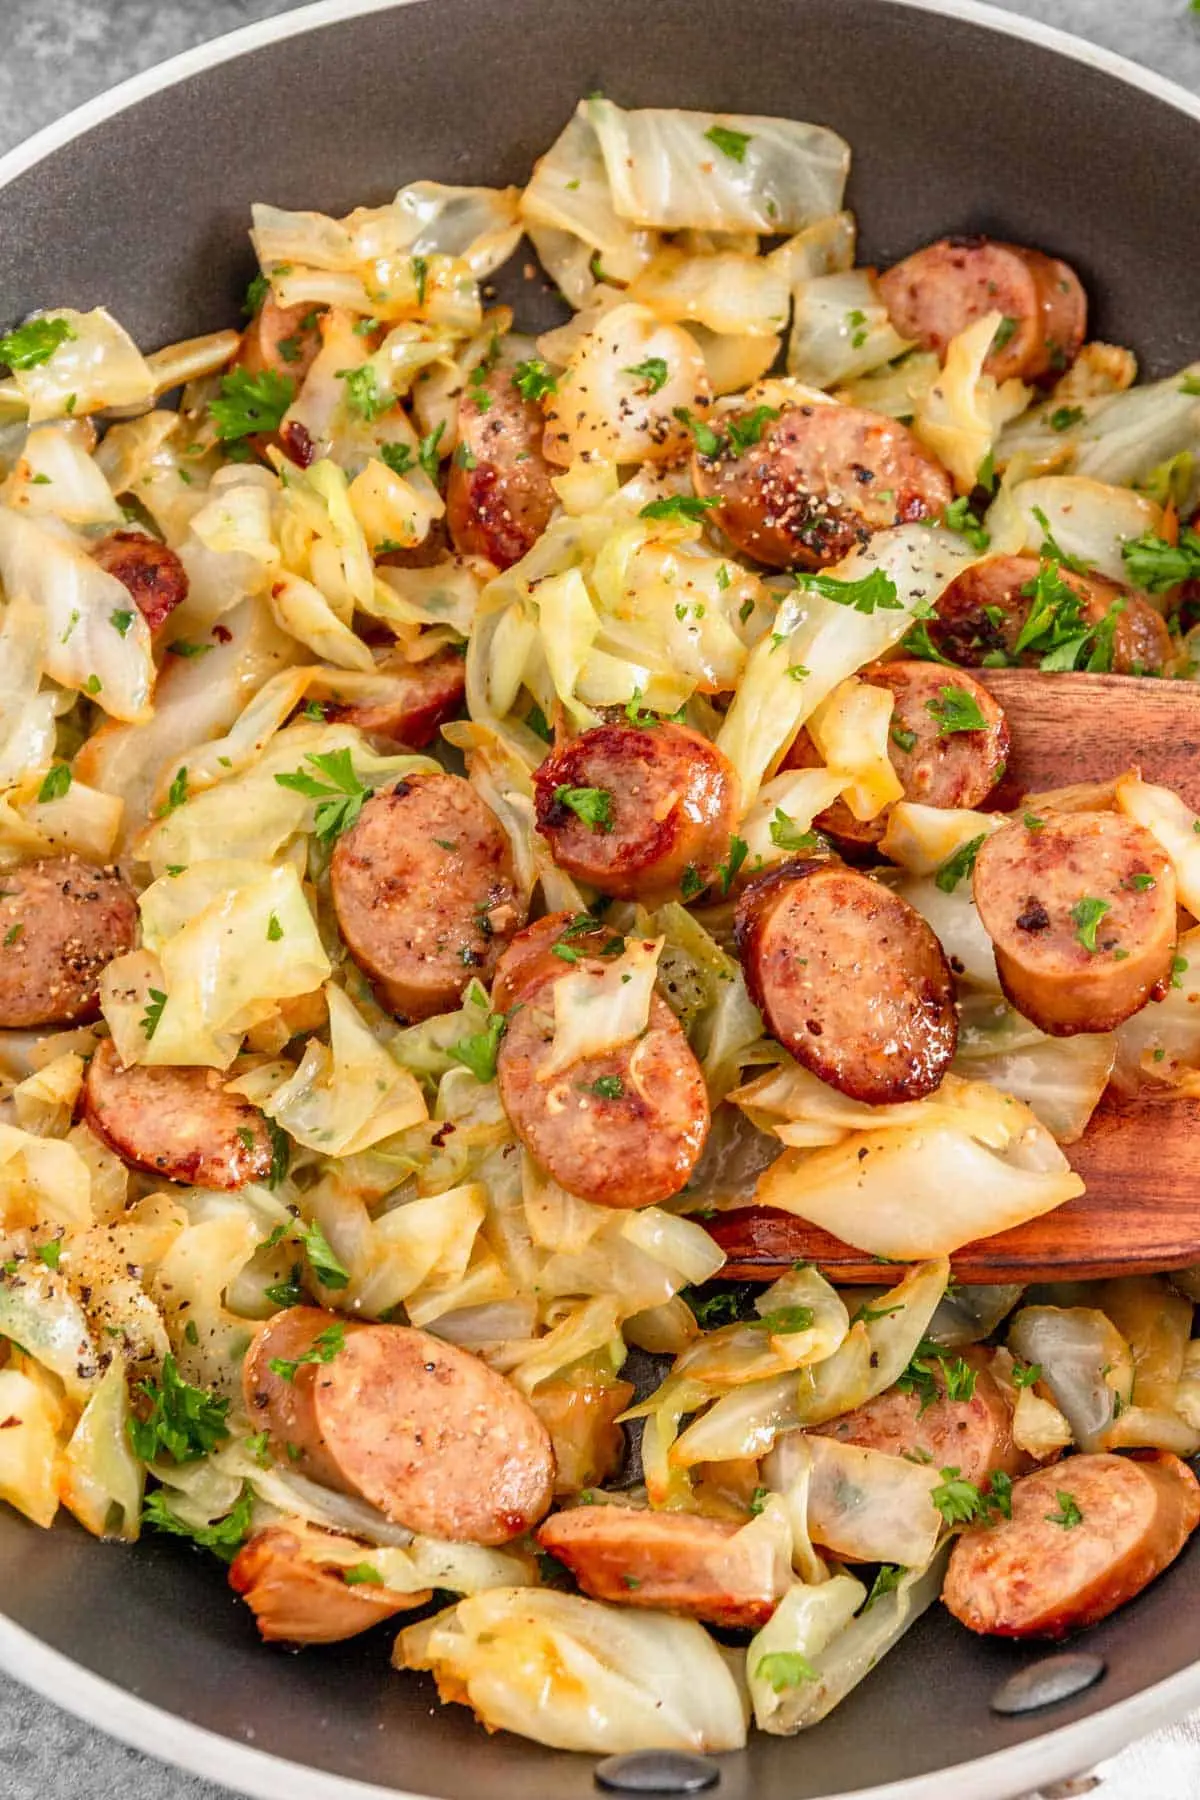 Delicious And Healthy Smoked Sausage And Cabbage Recipe | Smokedbyewe